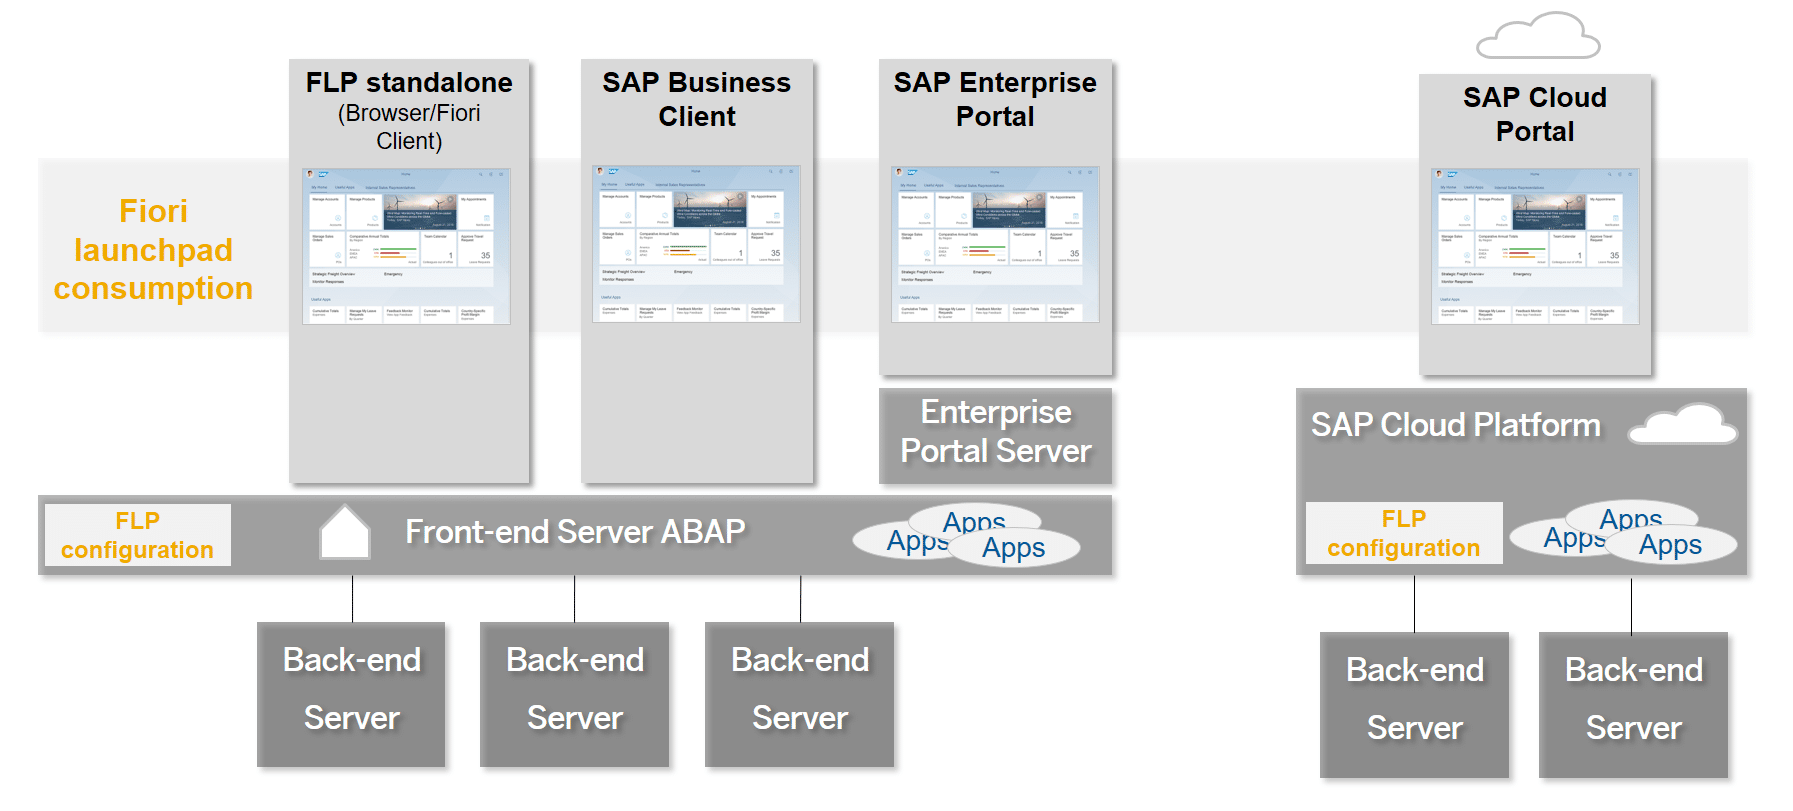 sap-fiori-launchpad-deployment-options-and-recommendations-2